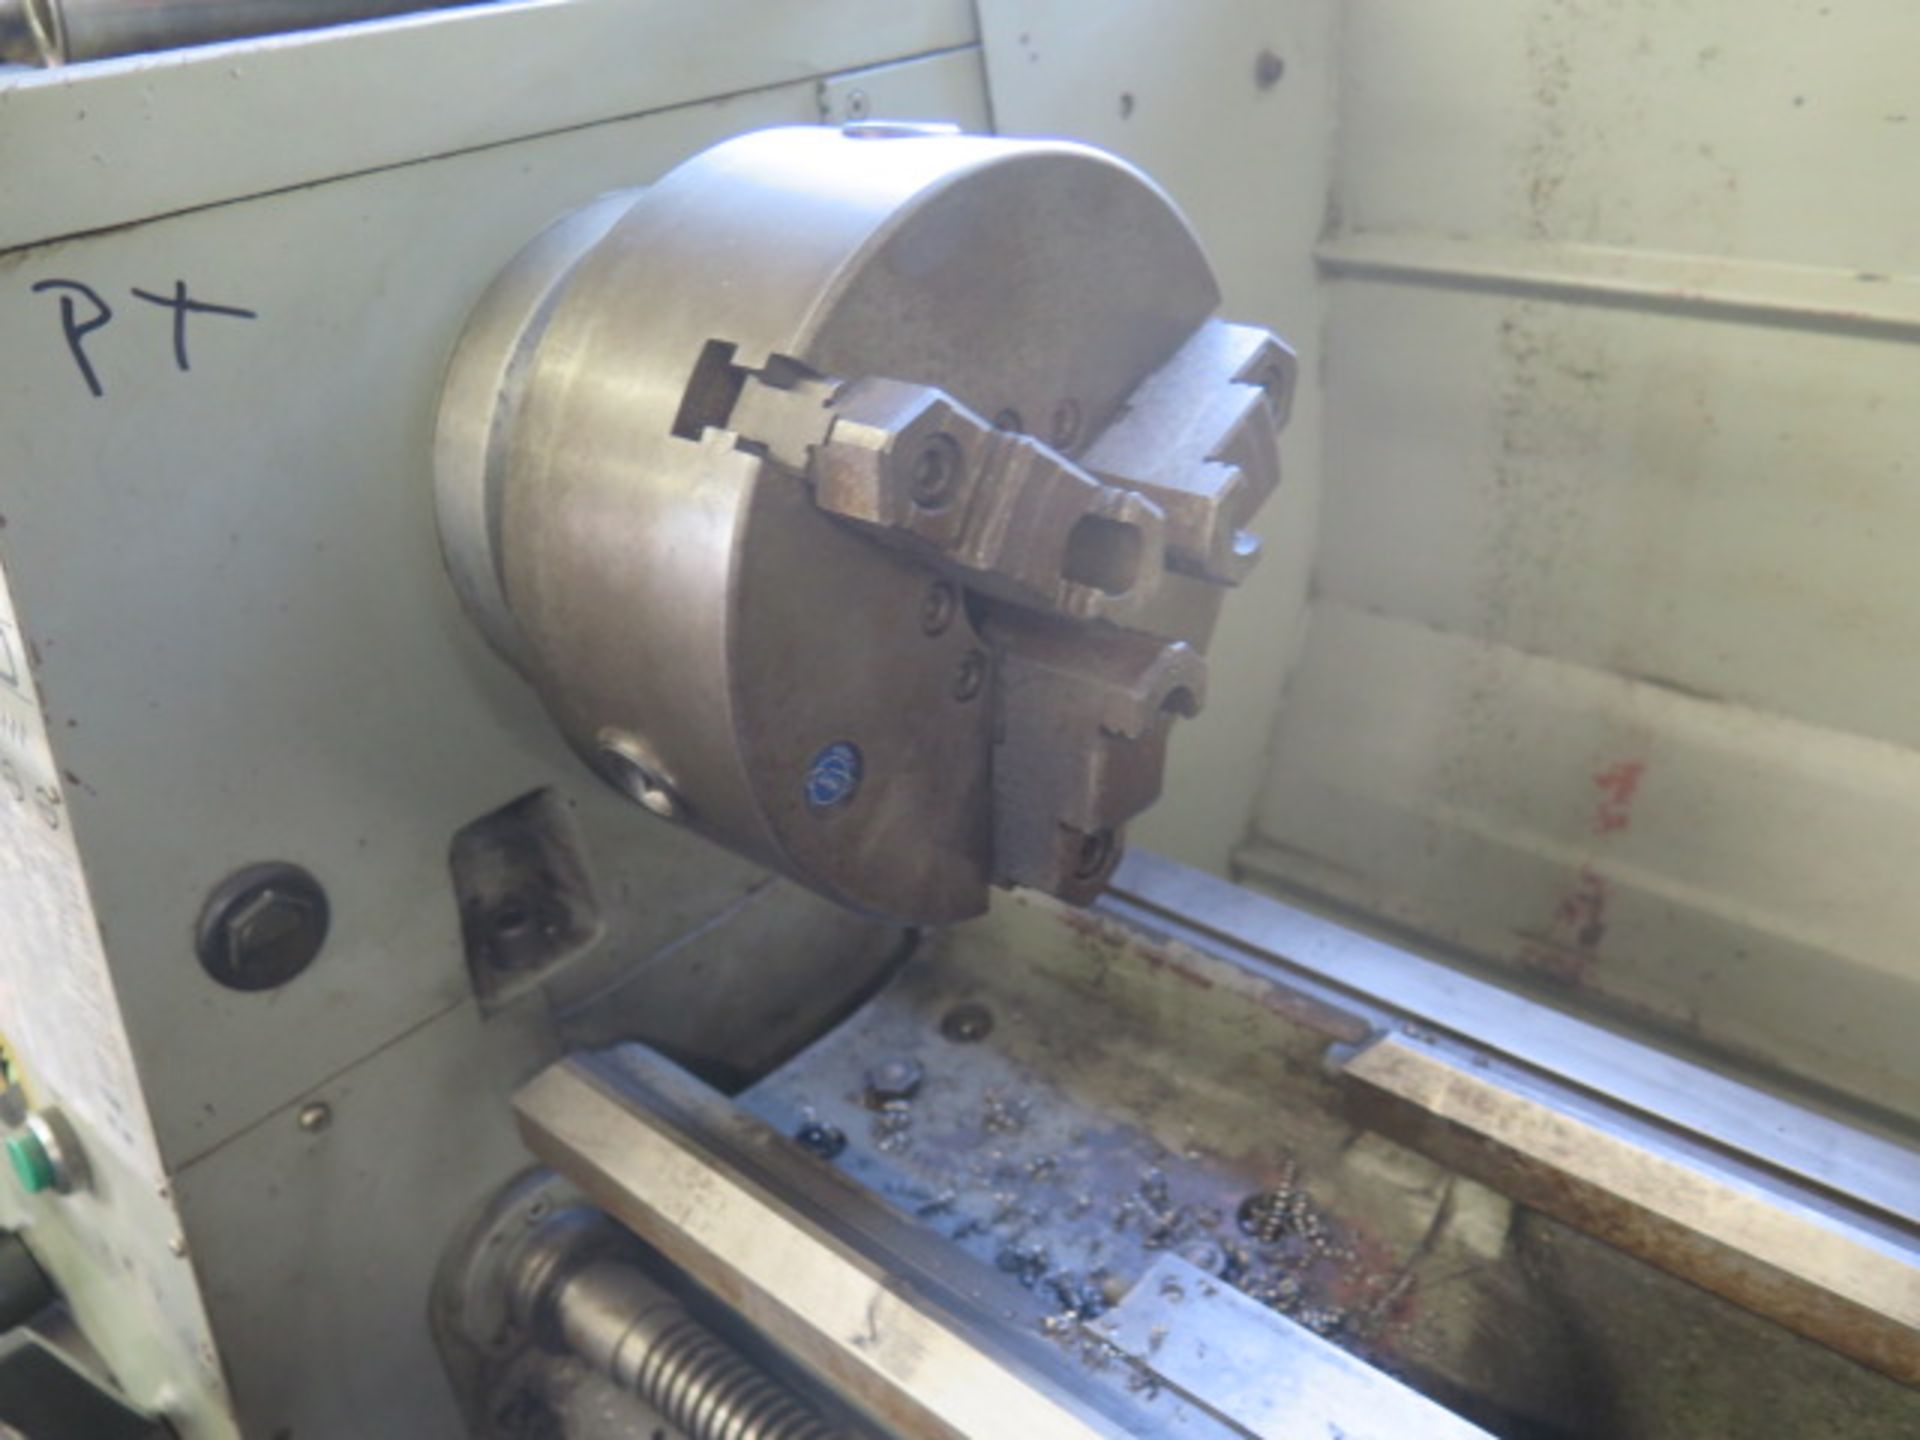 1997 Turret “Turnmaster” TRL-1340G 13” x 40” Geared Head Gap Bed Lathe s/n 13497011367, SOLD AS IS - Image 6 of 13